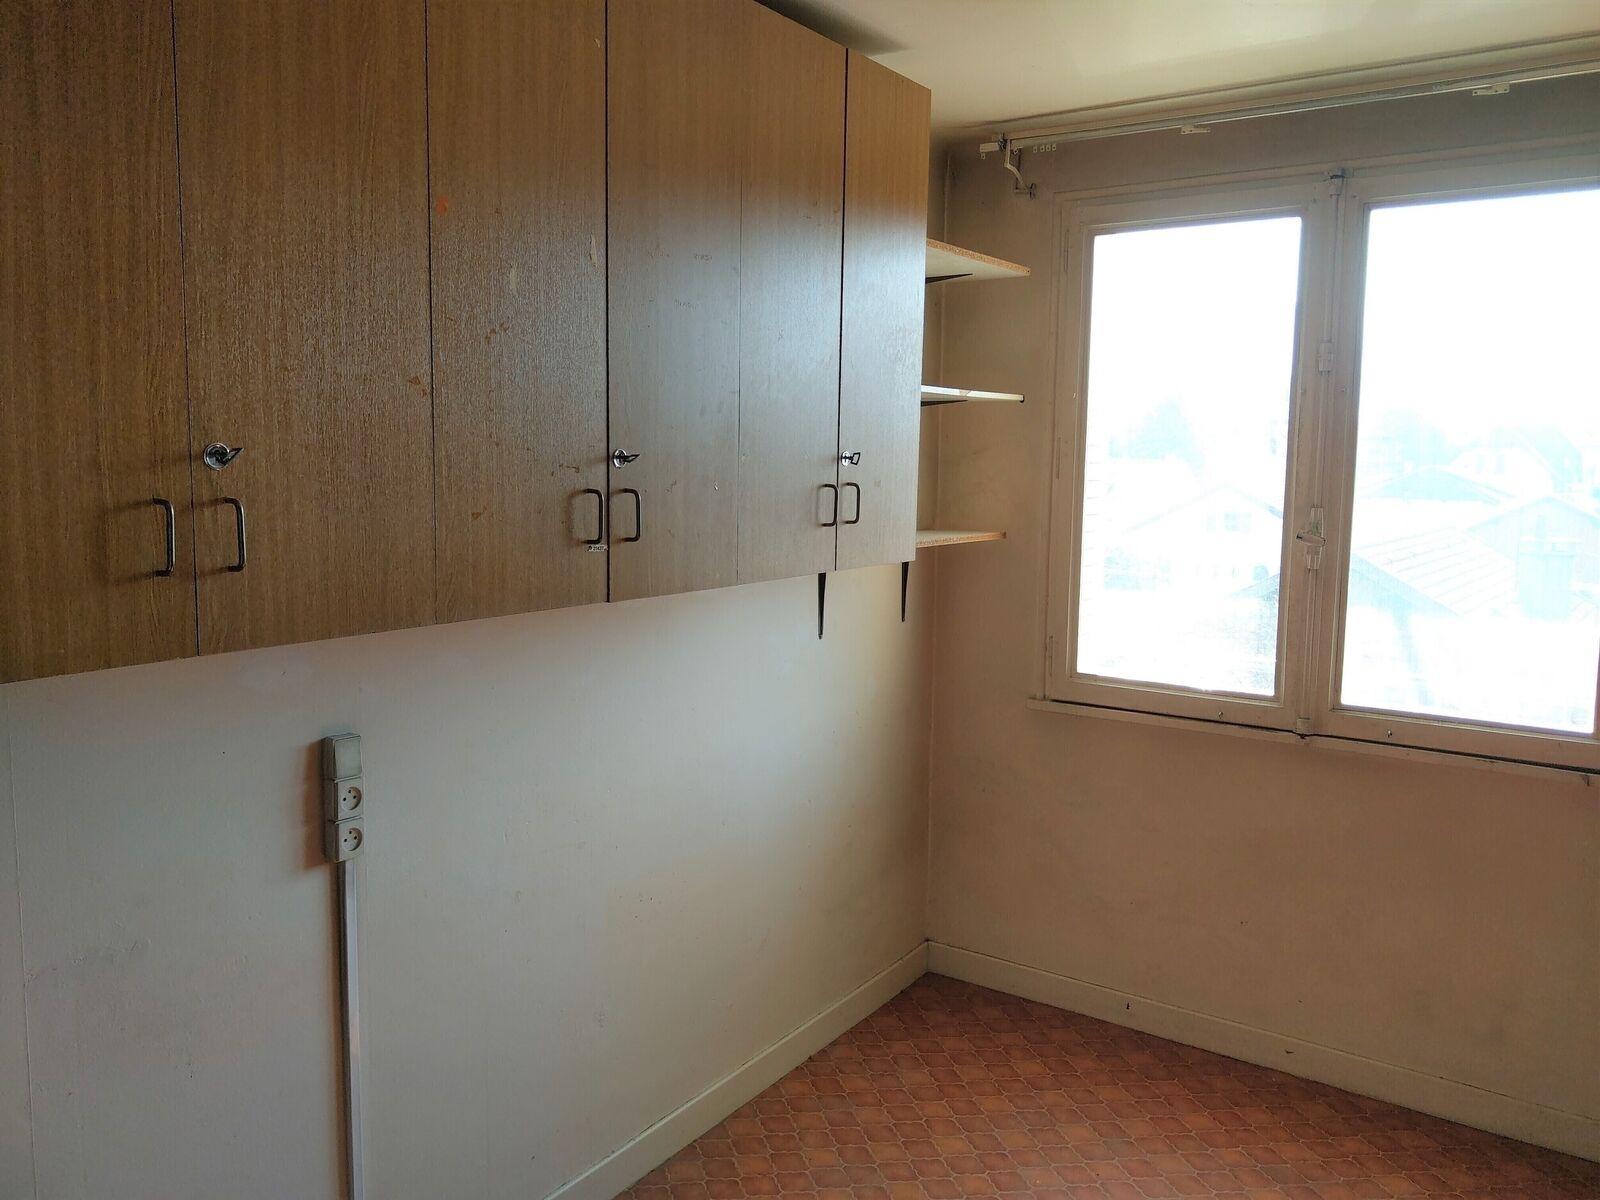 Appartement 2 pièces 74000 Annecy - #rbmimmo #annecy #appartement #lafourmiimmo